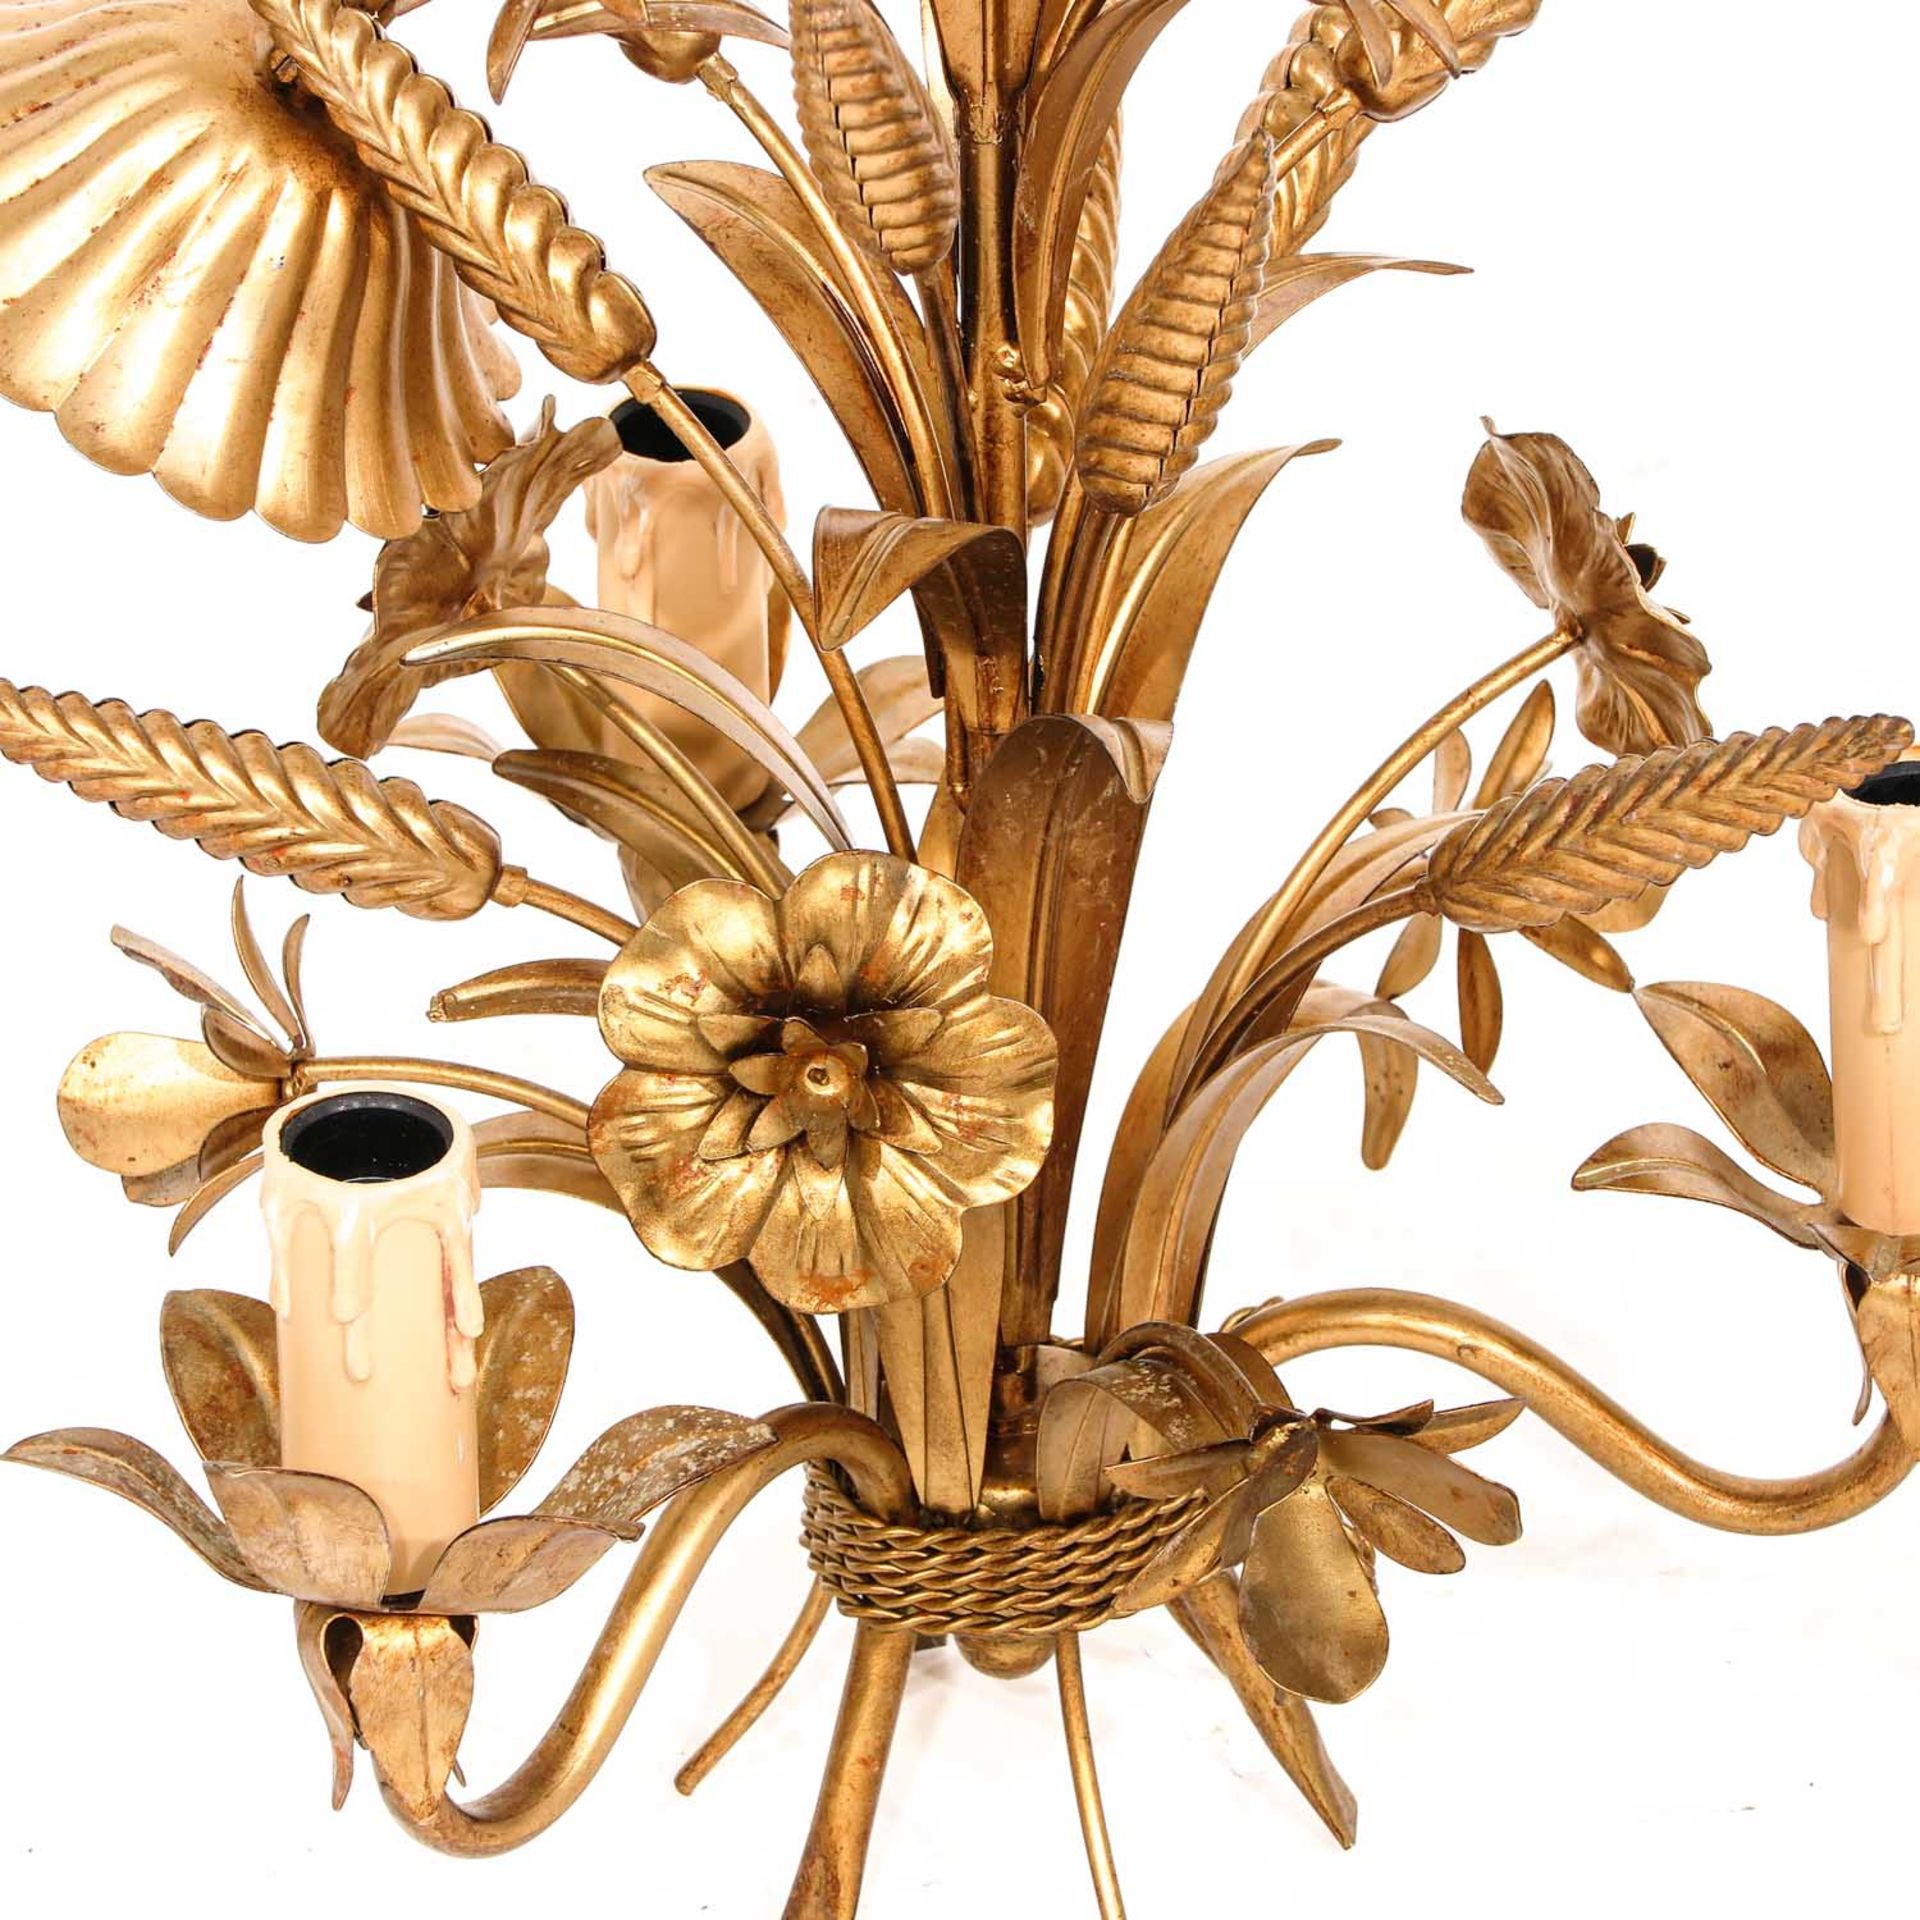 A Collection of 3 Wheat Chandeliers - Image 6 of 9